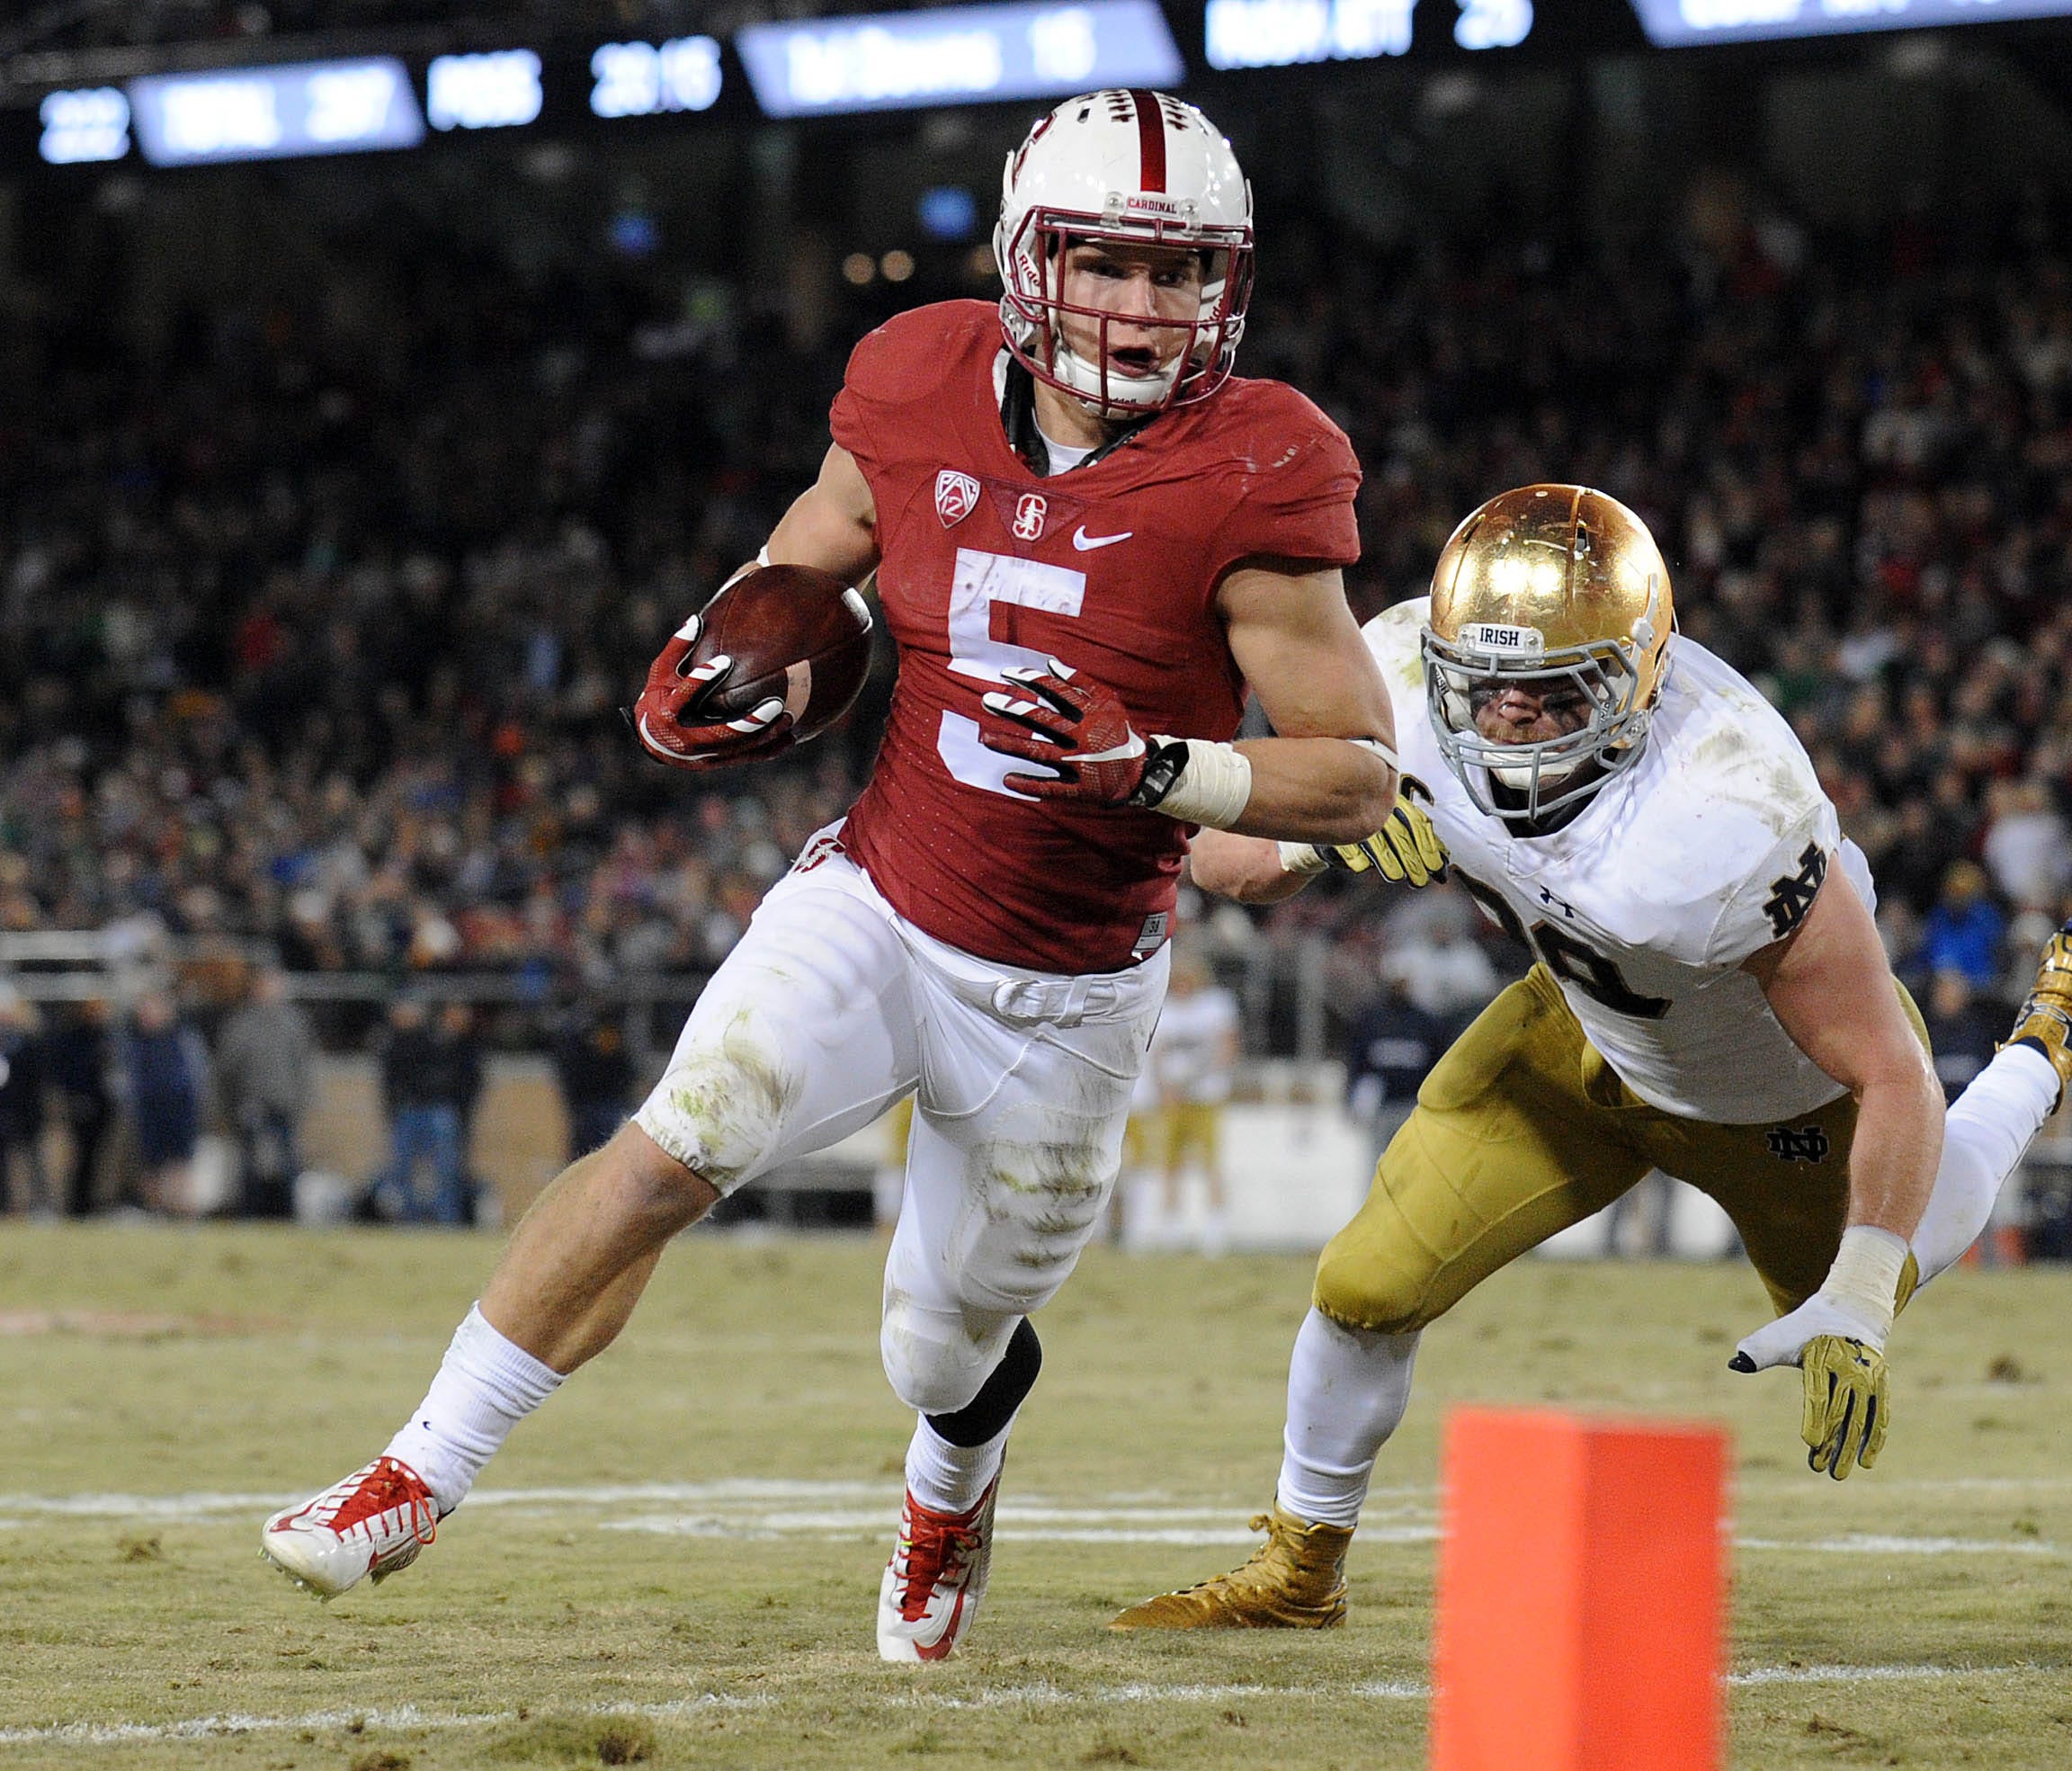 Christian McCaffrey ran for 3,622 yards and 21 touchdowns over his final two seasons at Stanford.